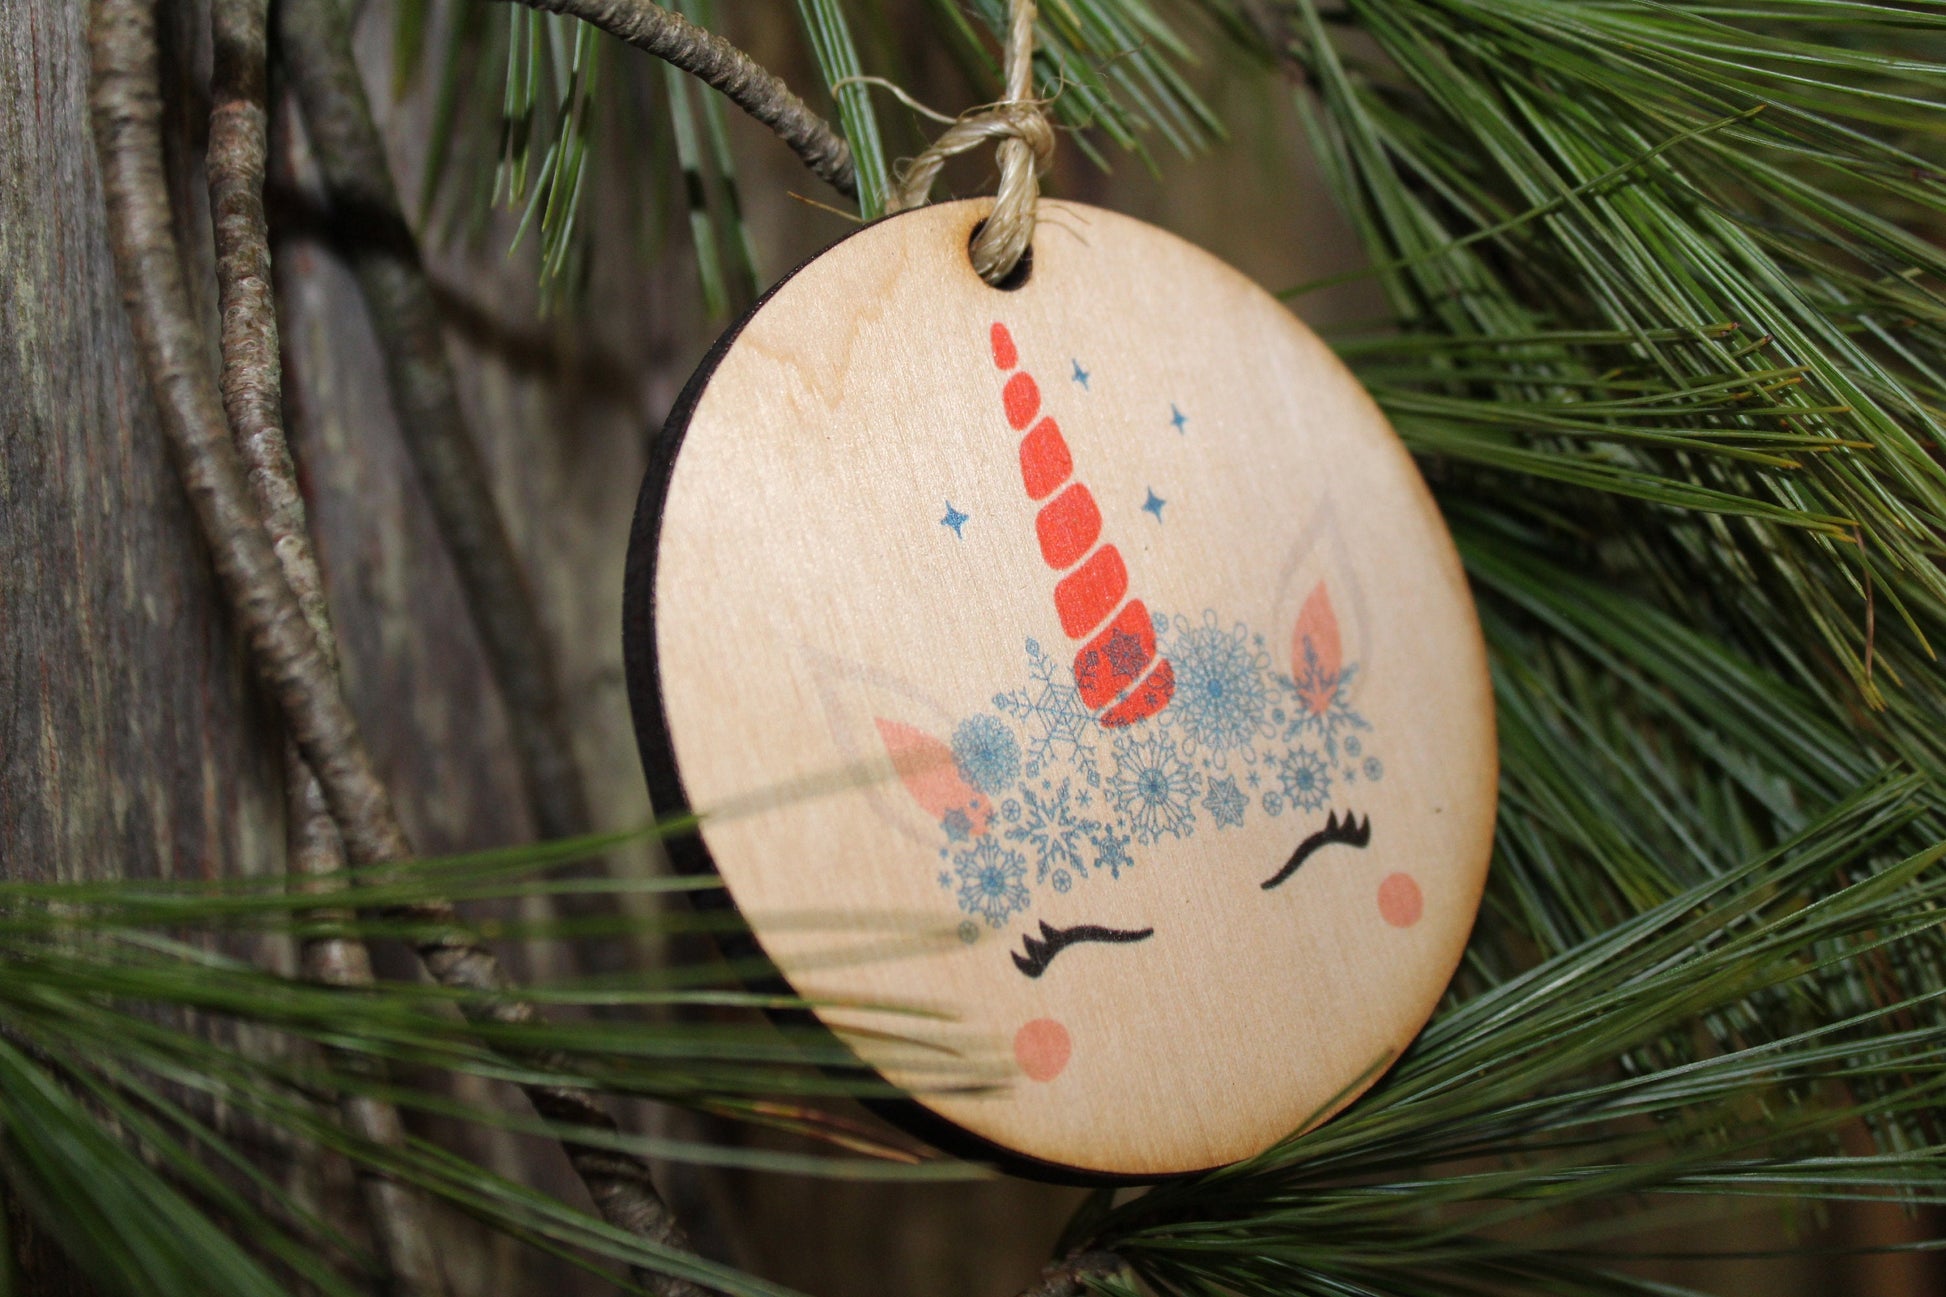 Unicorn Face Ornament With Snowflakes Wood Slice Horn Eyelashes Up-close Winter Primitive Christmas Ornament Rustic Christmas Tree Printed